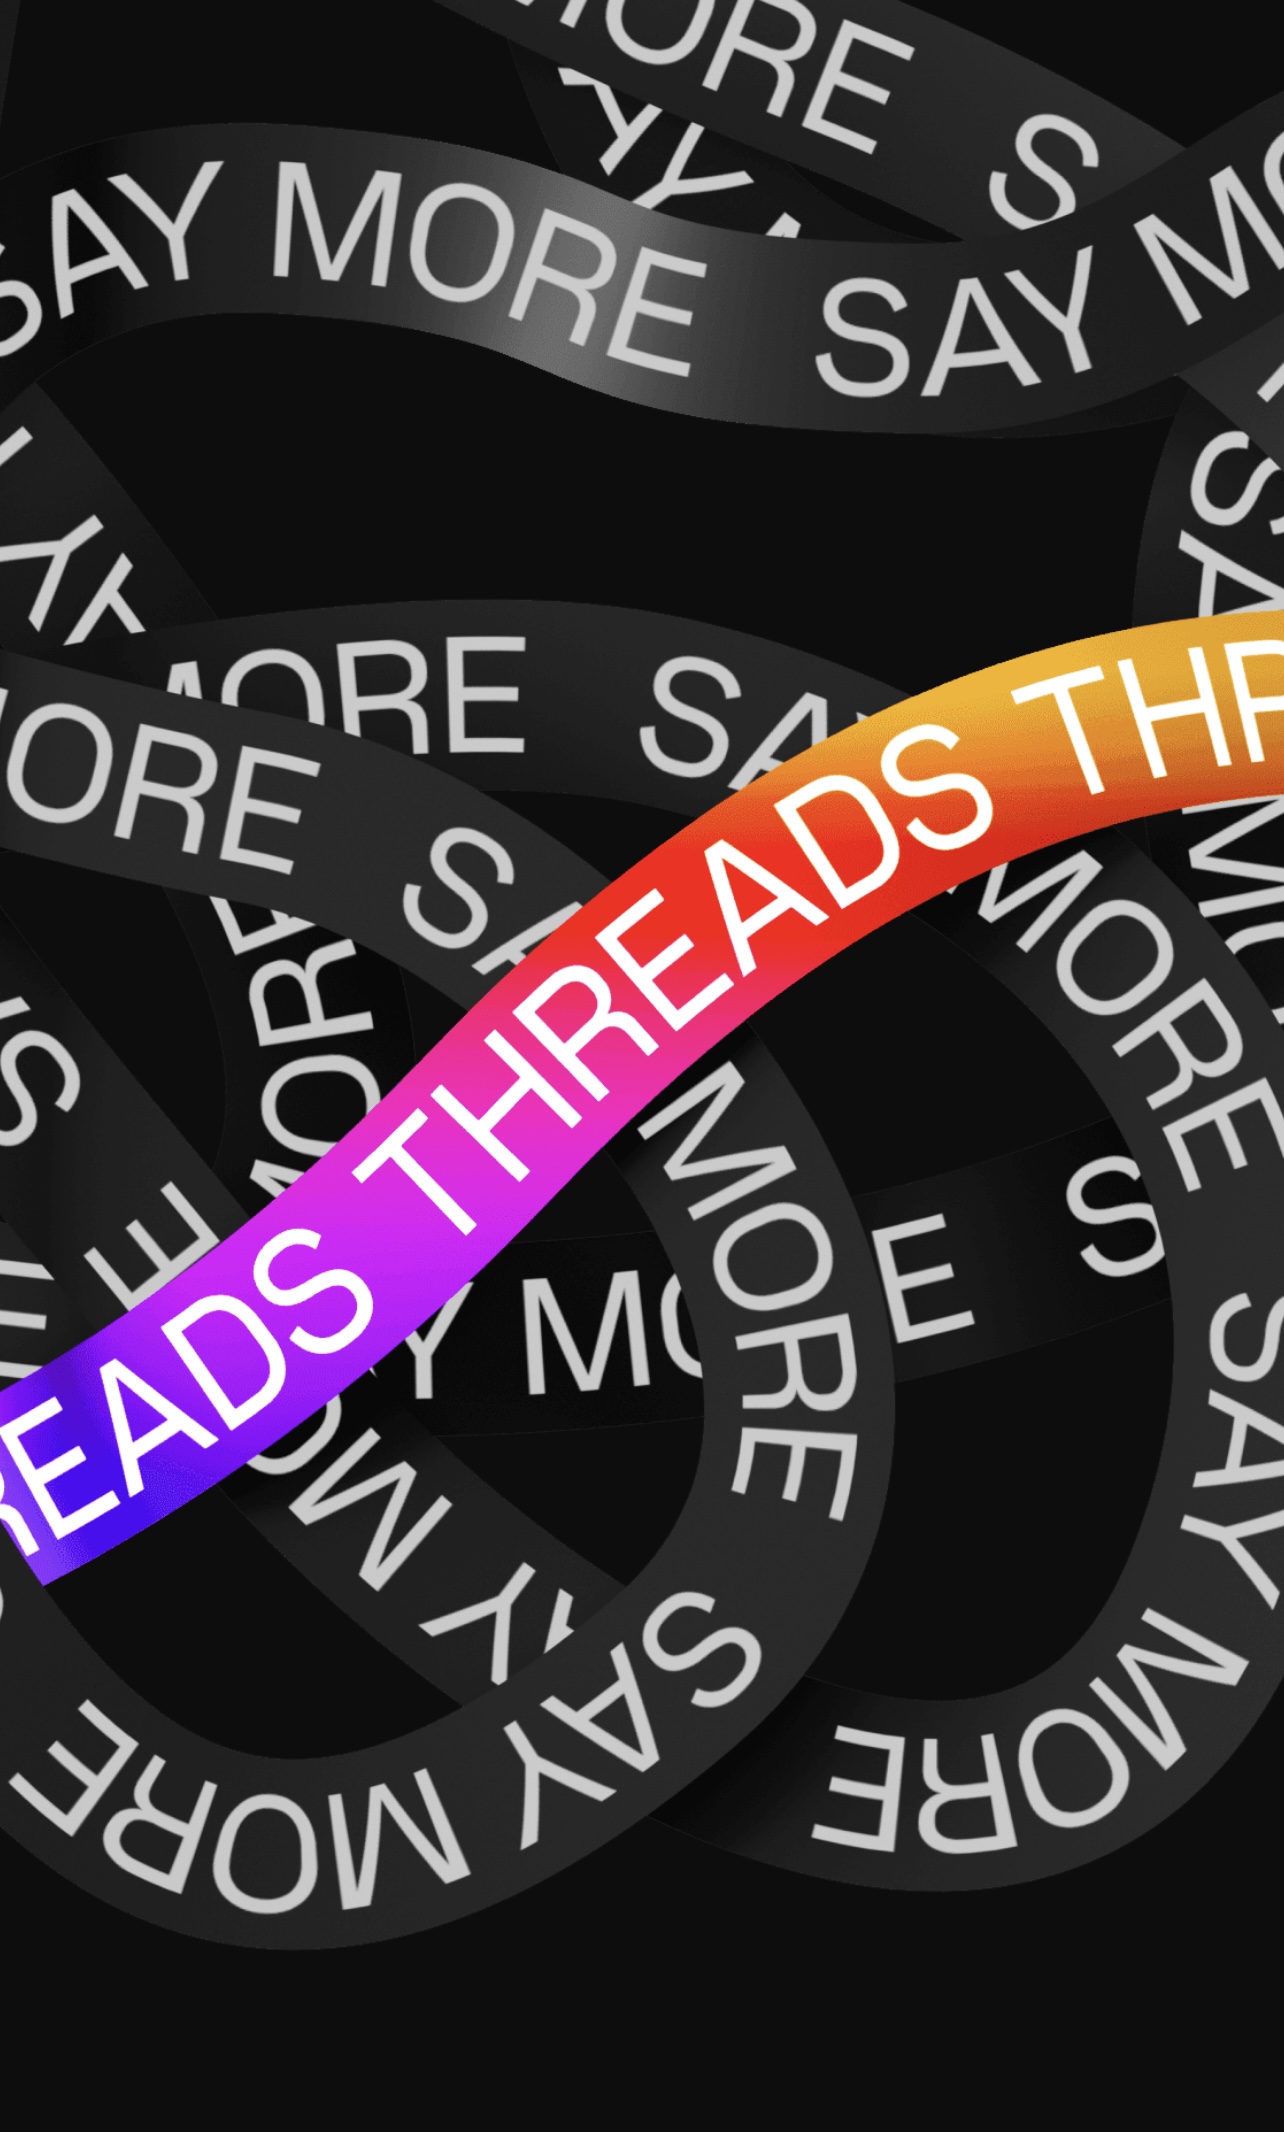 image of new social media application Threads